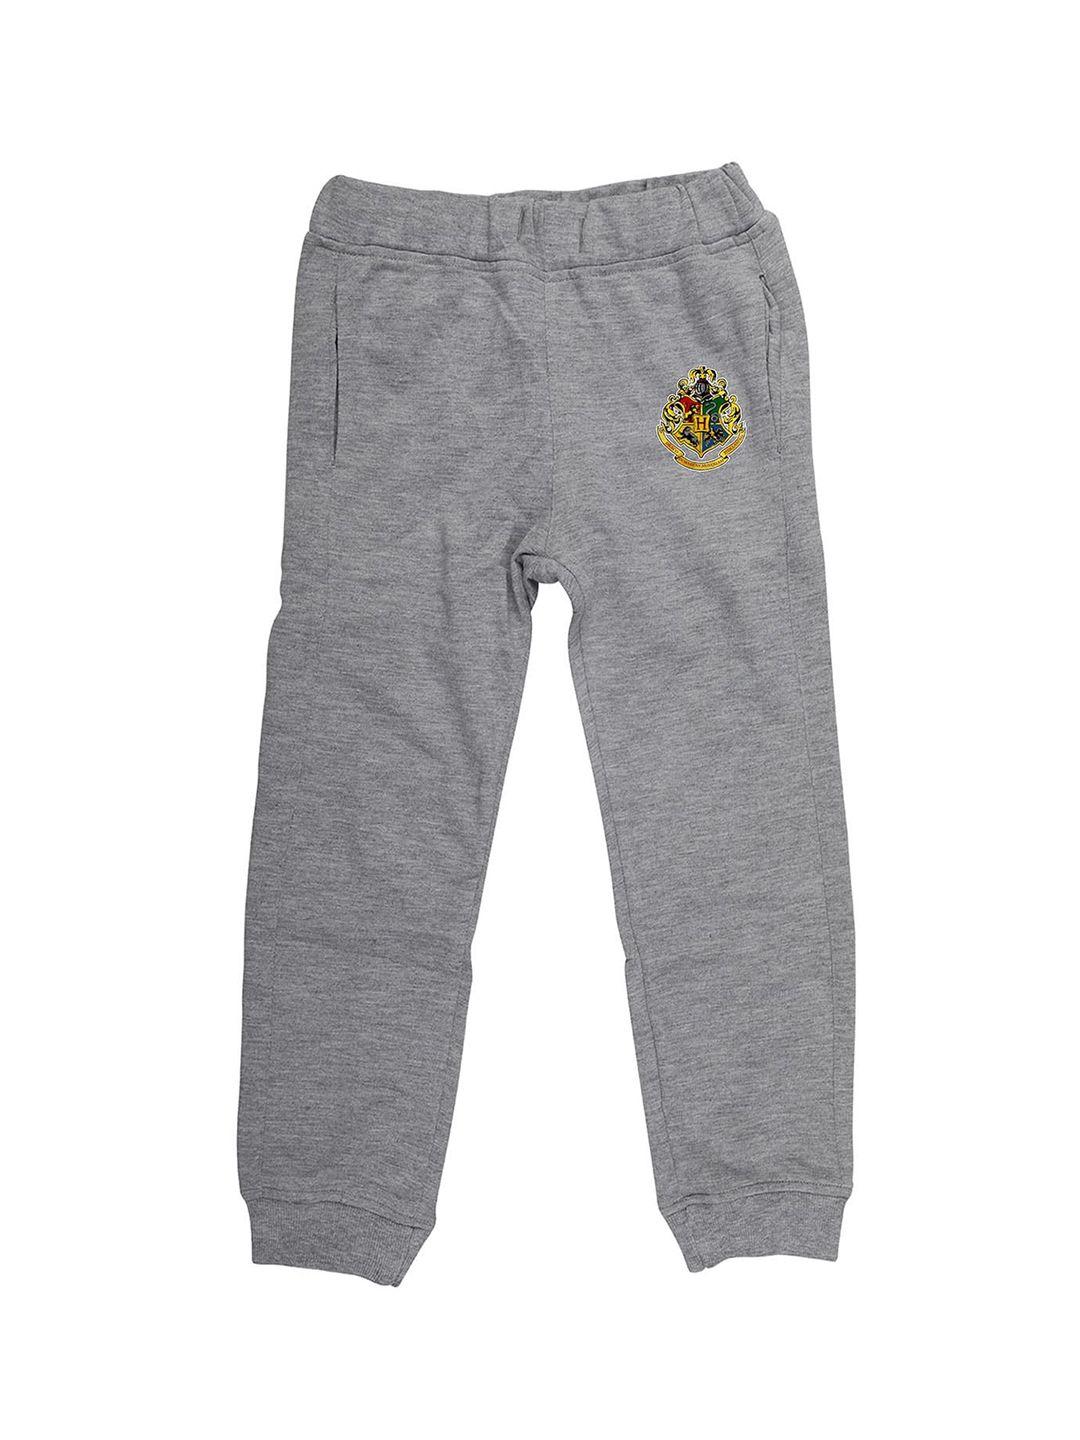 harry potter boys grey solid joggers